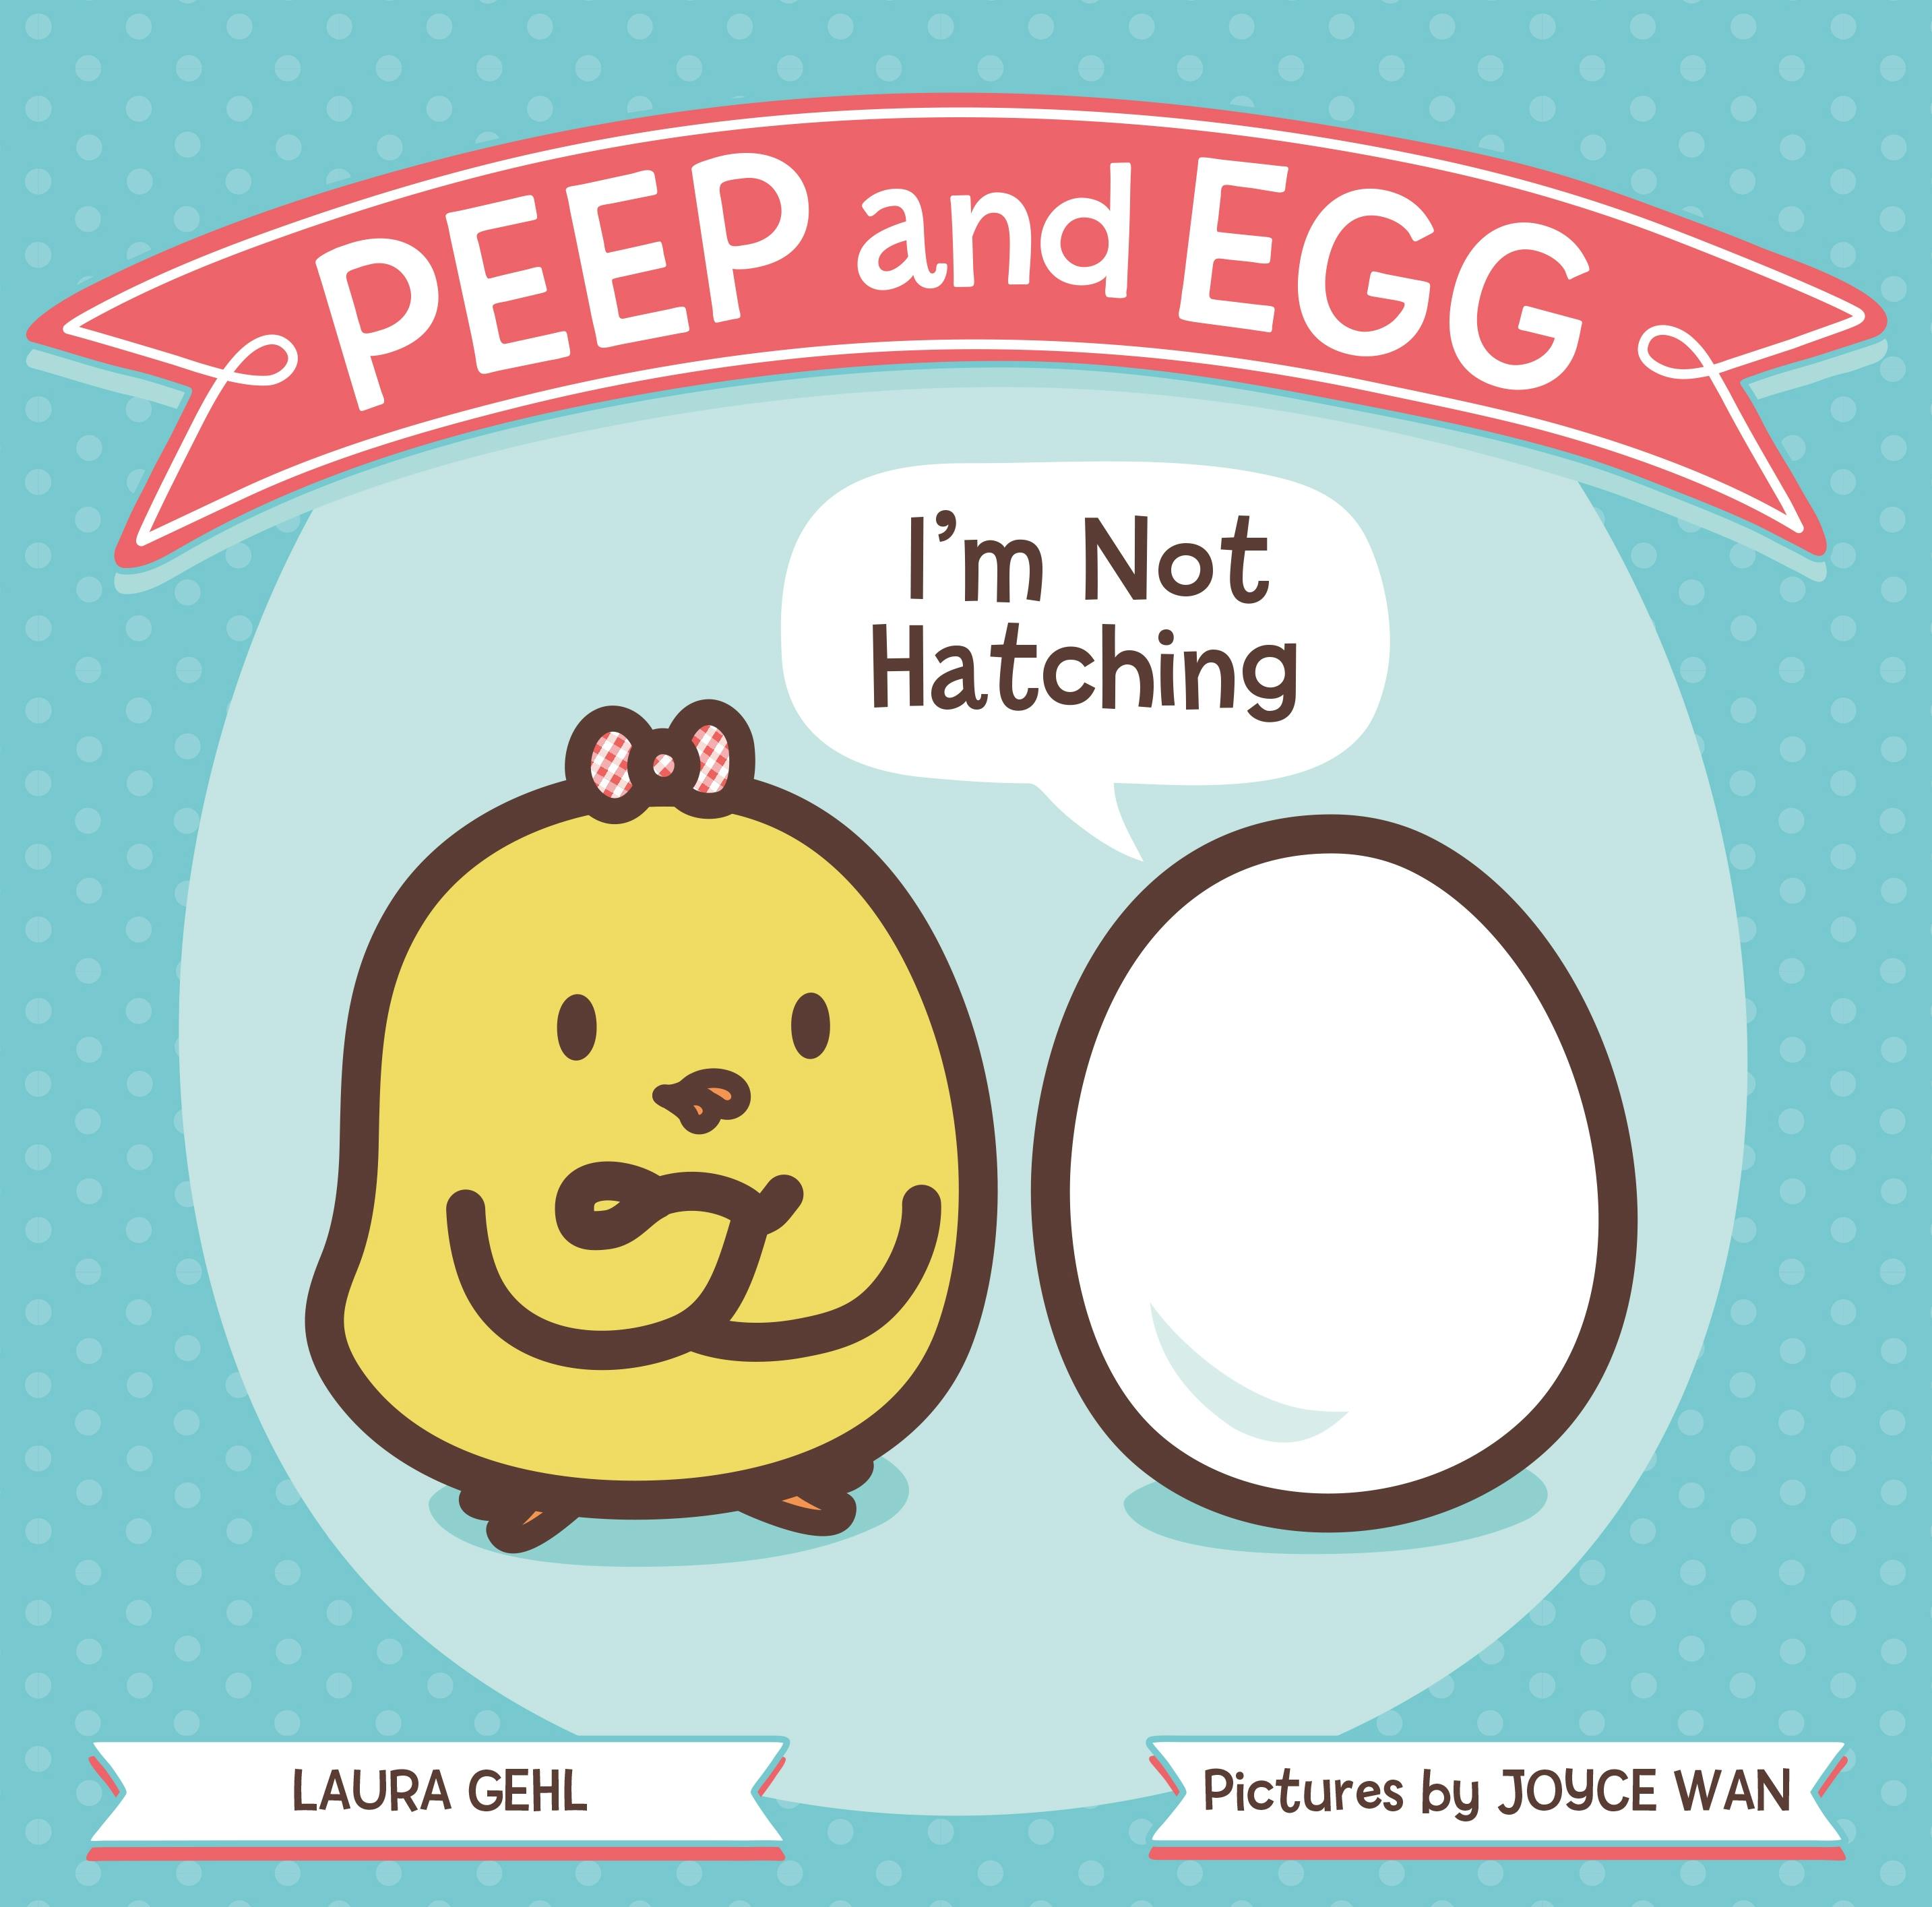 Image of Peep and Egg: I'm Not Hatching